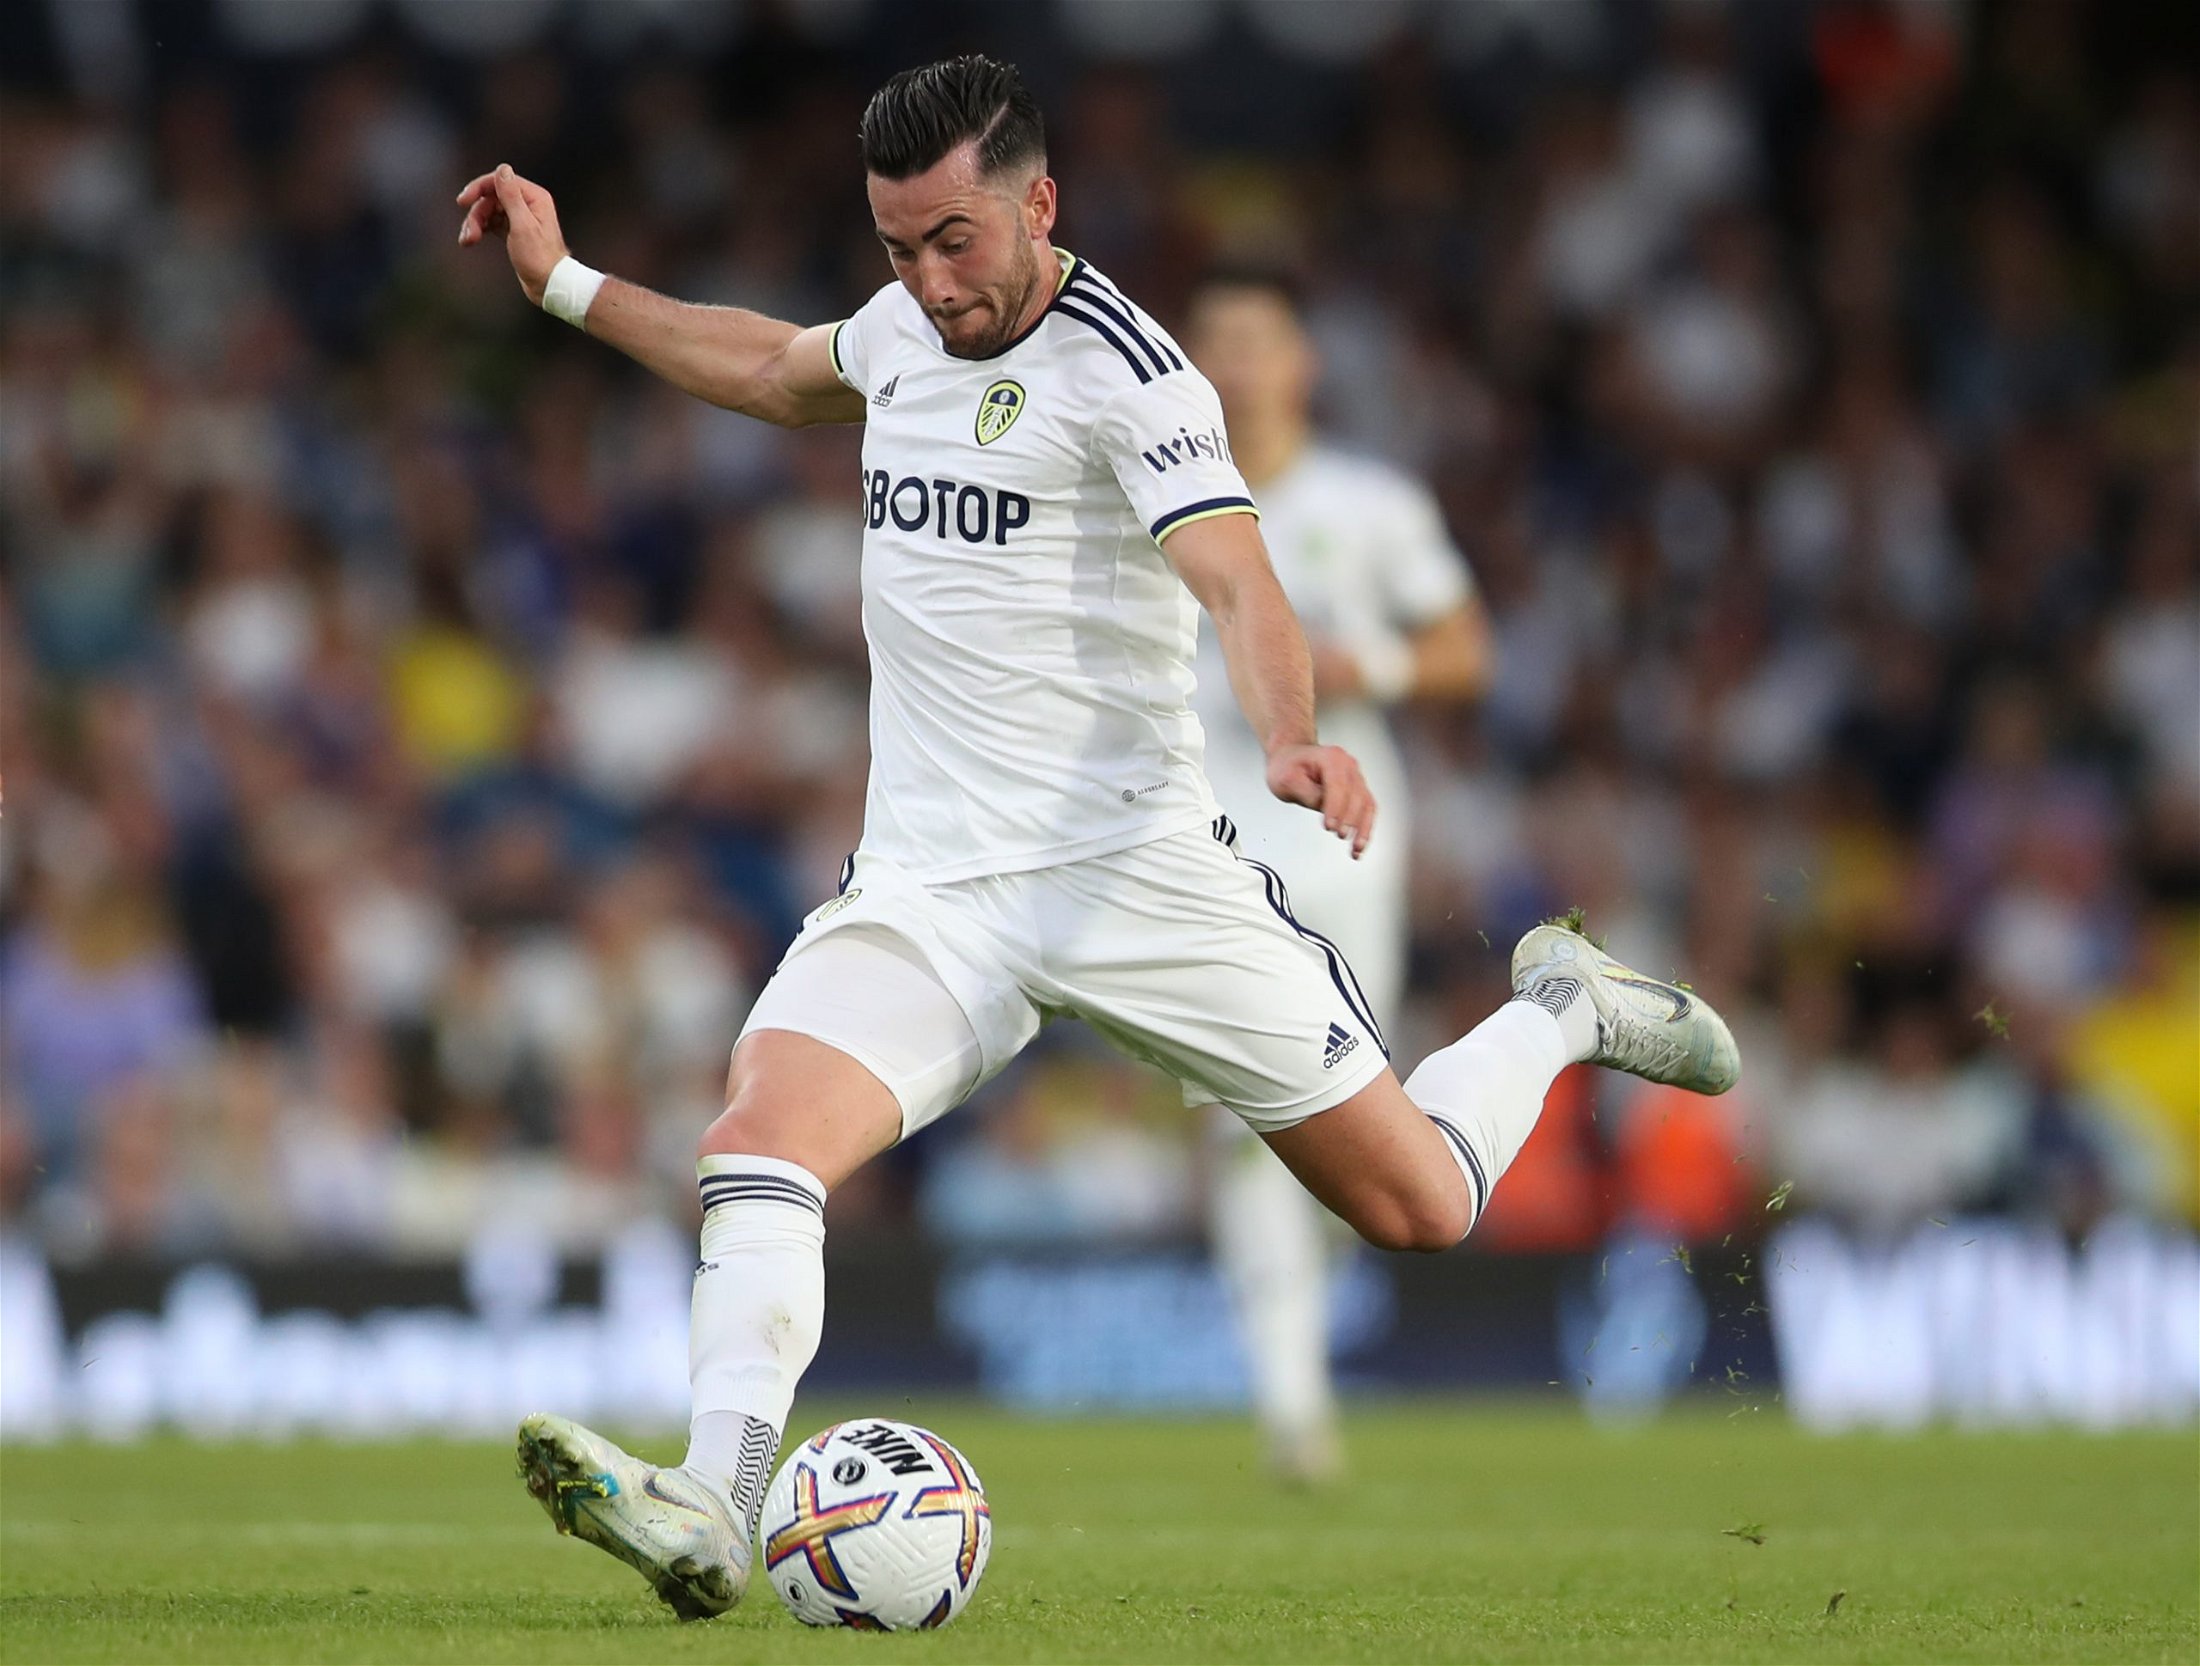 “Can’t wait” – Jack Harrison shares Leeds United message amid persistent Newcastle links